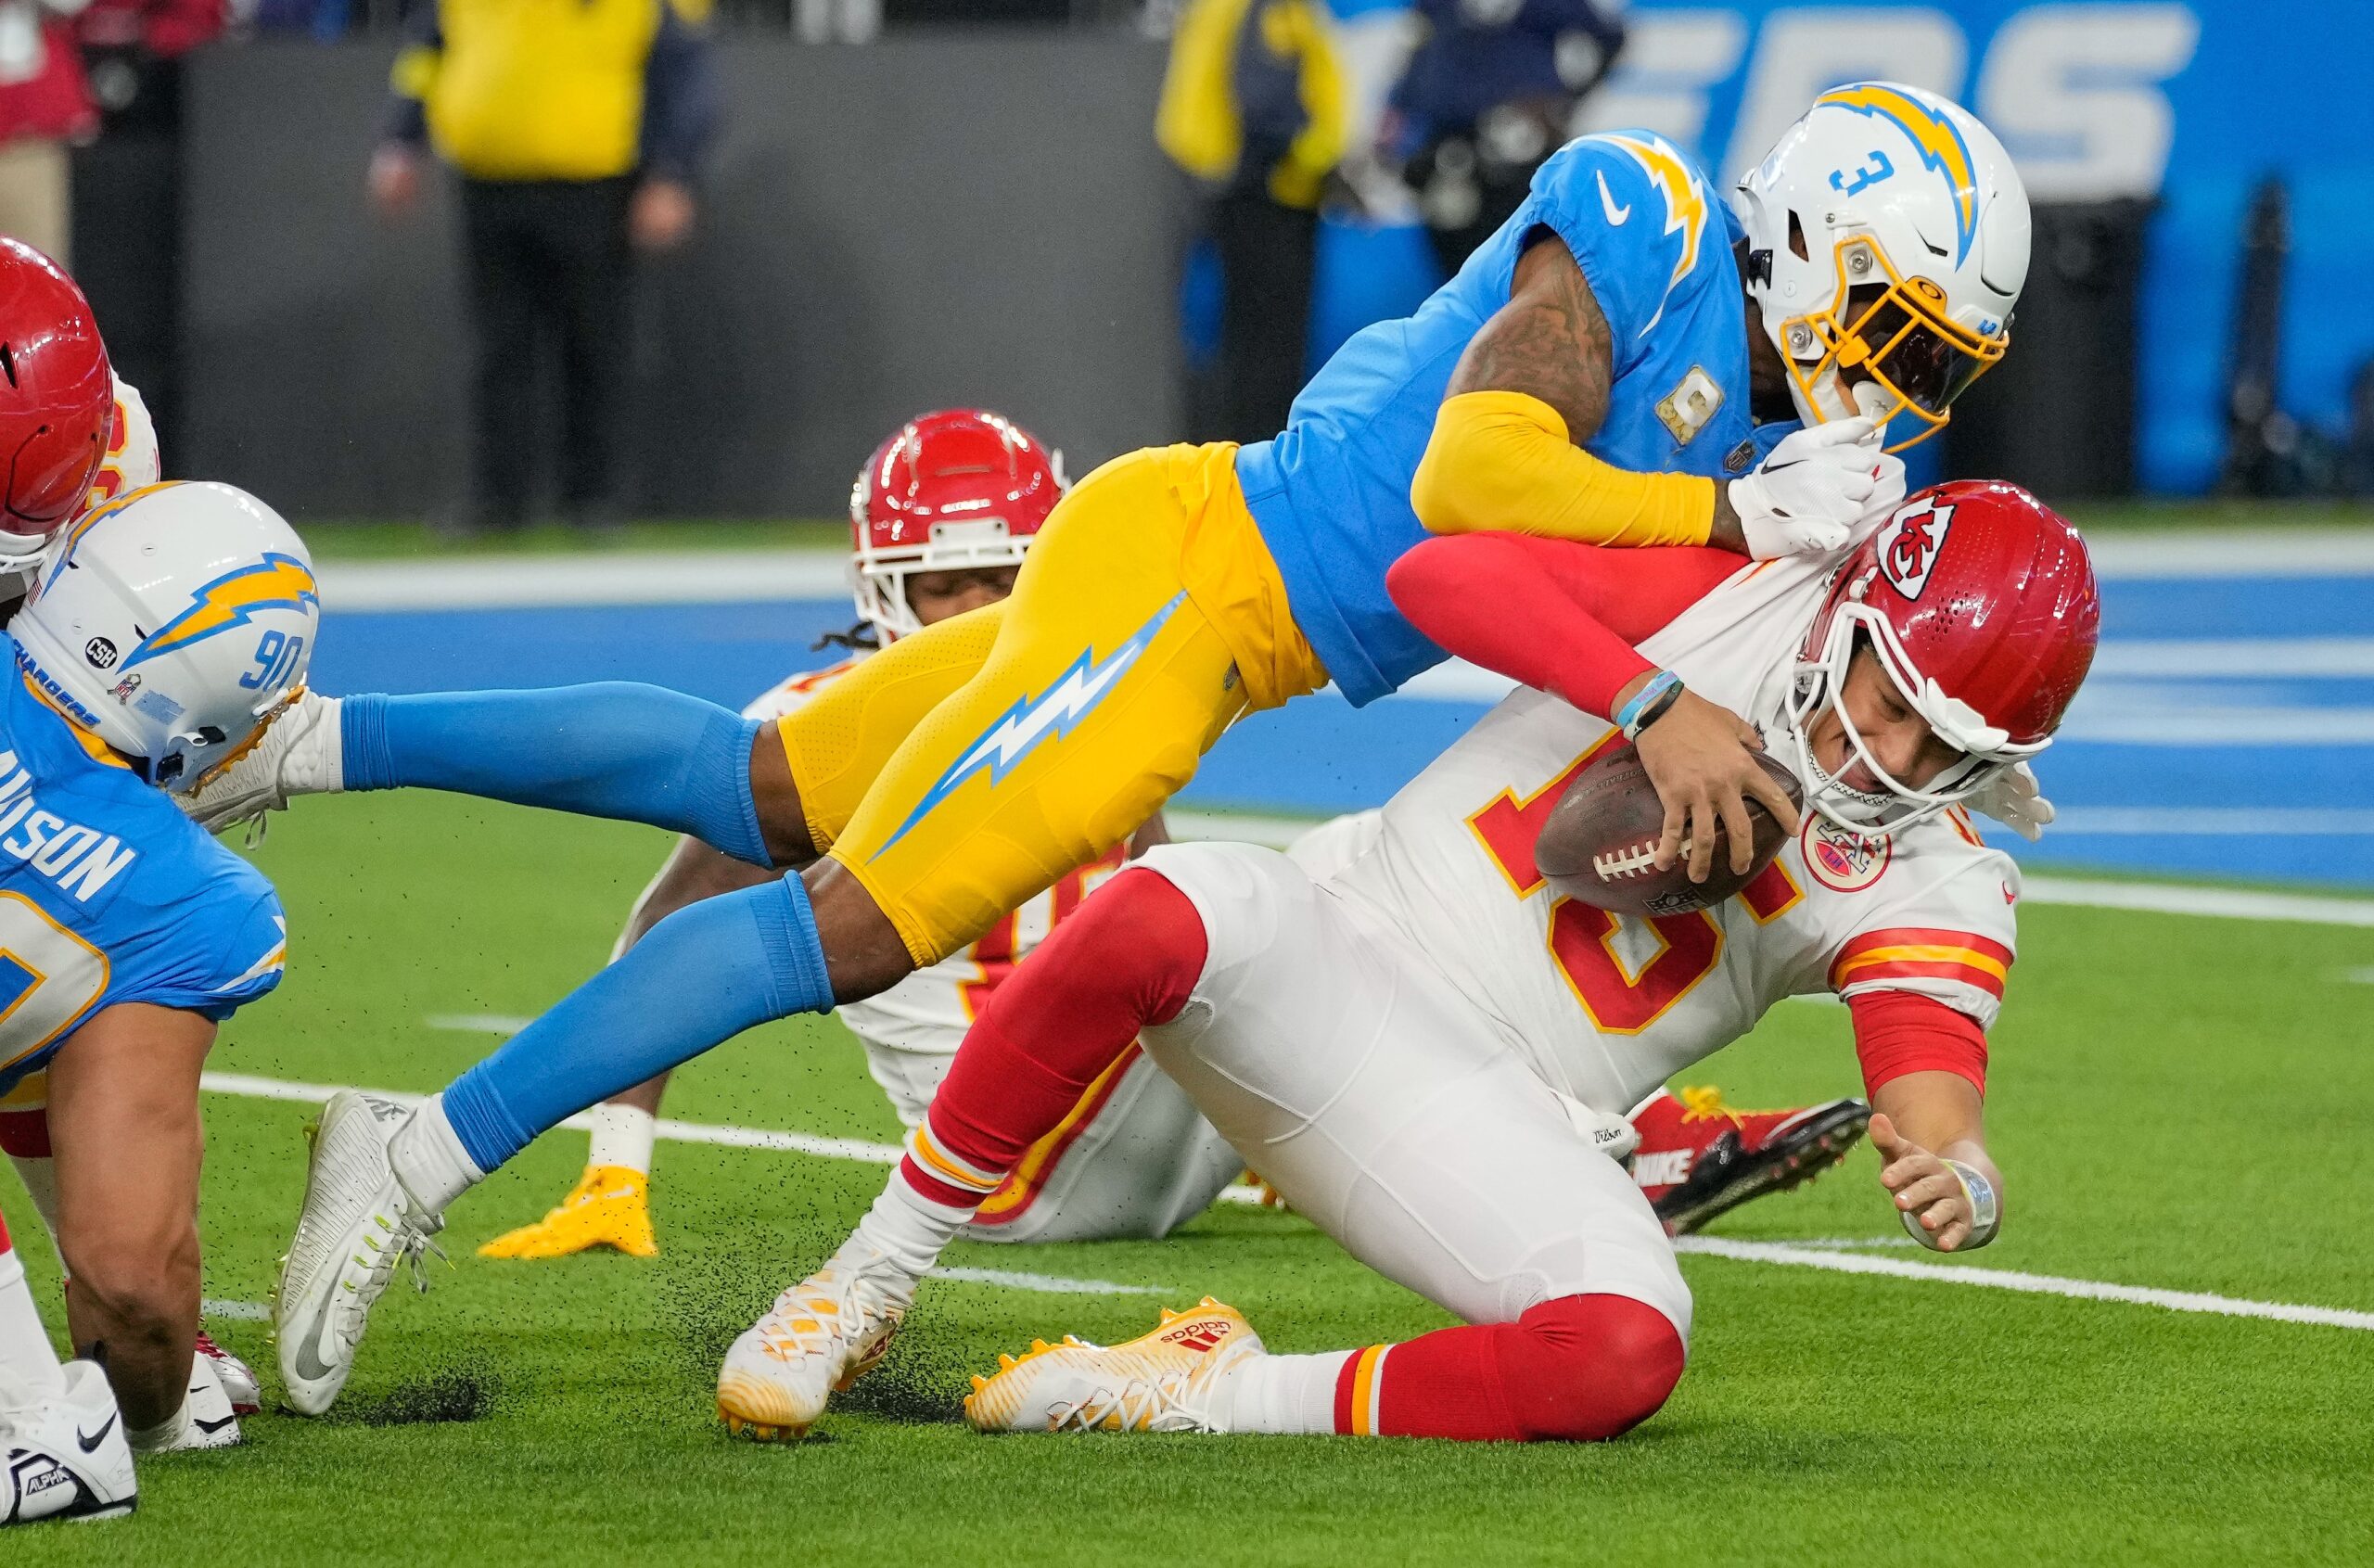 Chargers Vs Chiefs Prediction: Will 2023 Be The Year That The Chargers Get  The Win? - LAFB Network